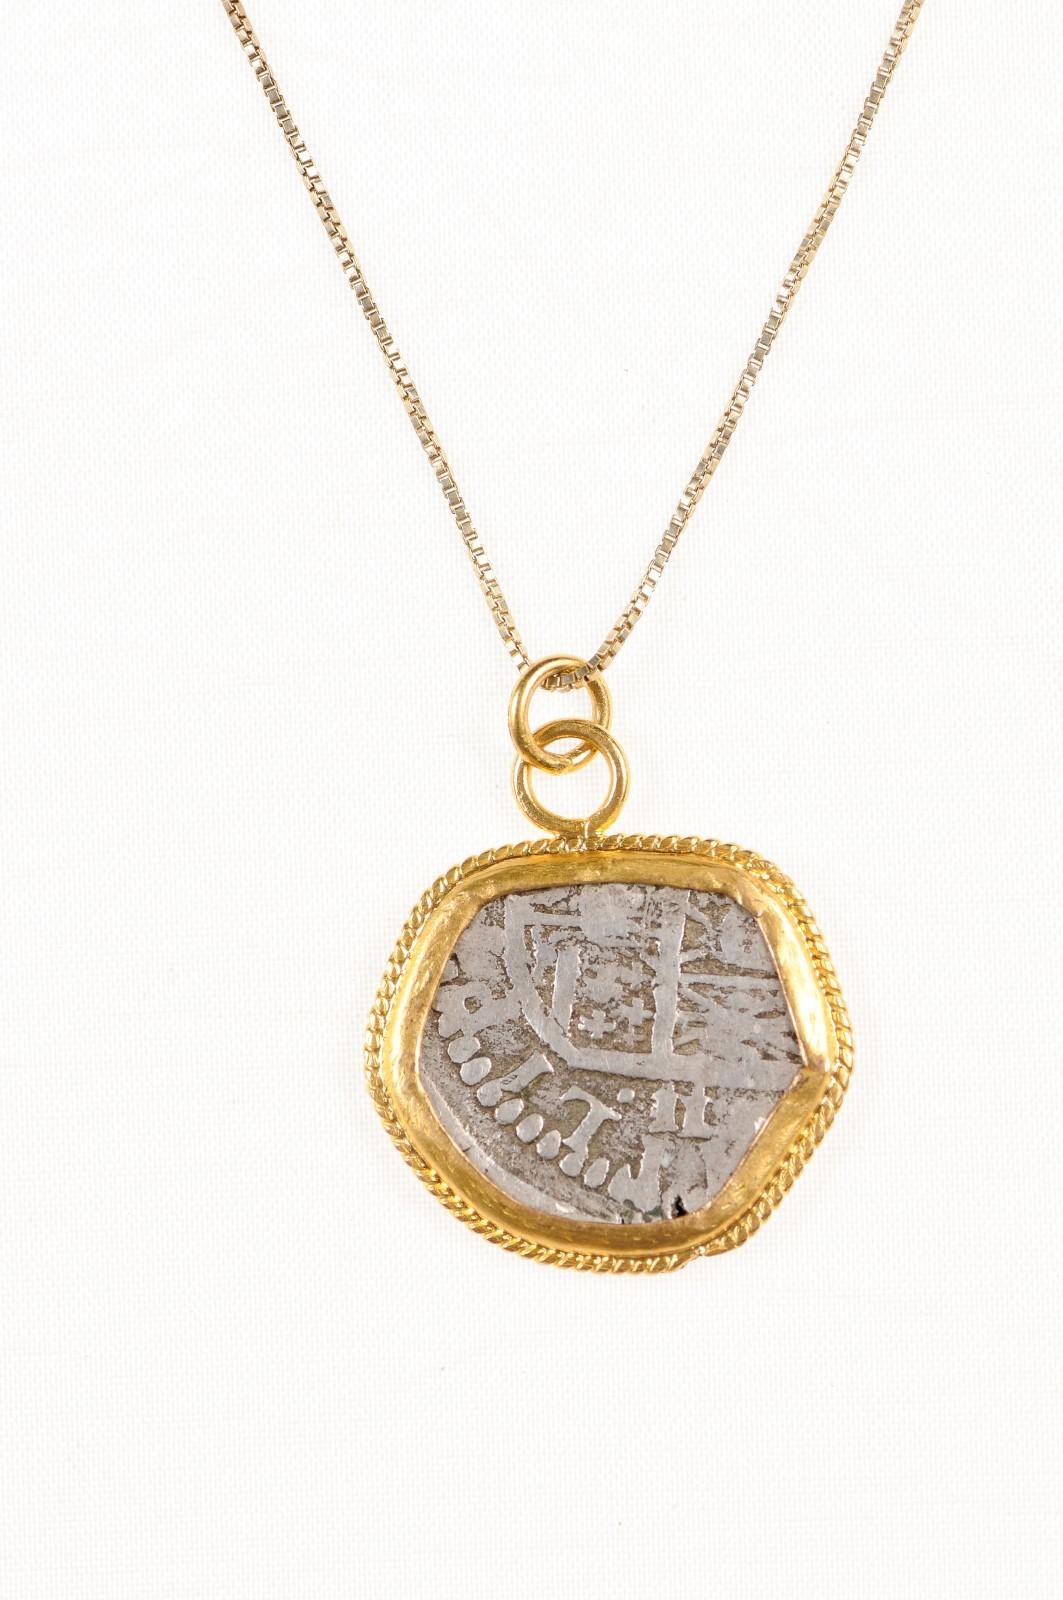 Spanish Silver Cob Coin in 22k Pendant (pendant only) For Sale 3